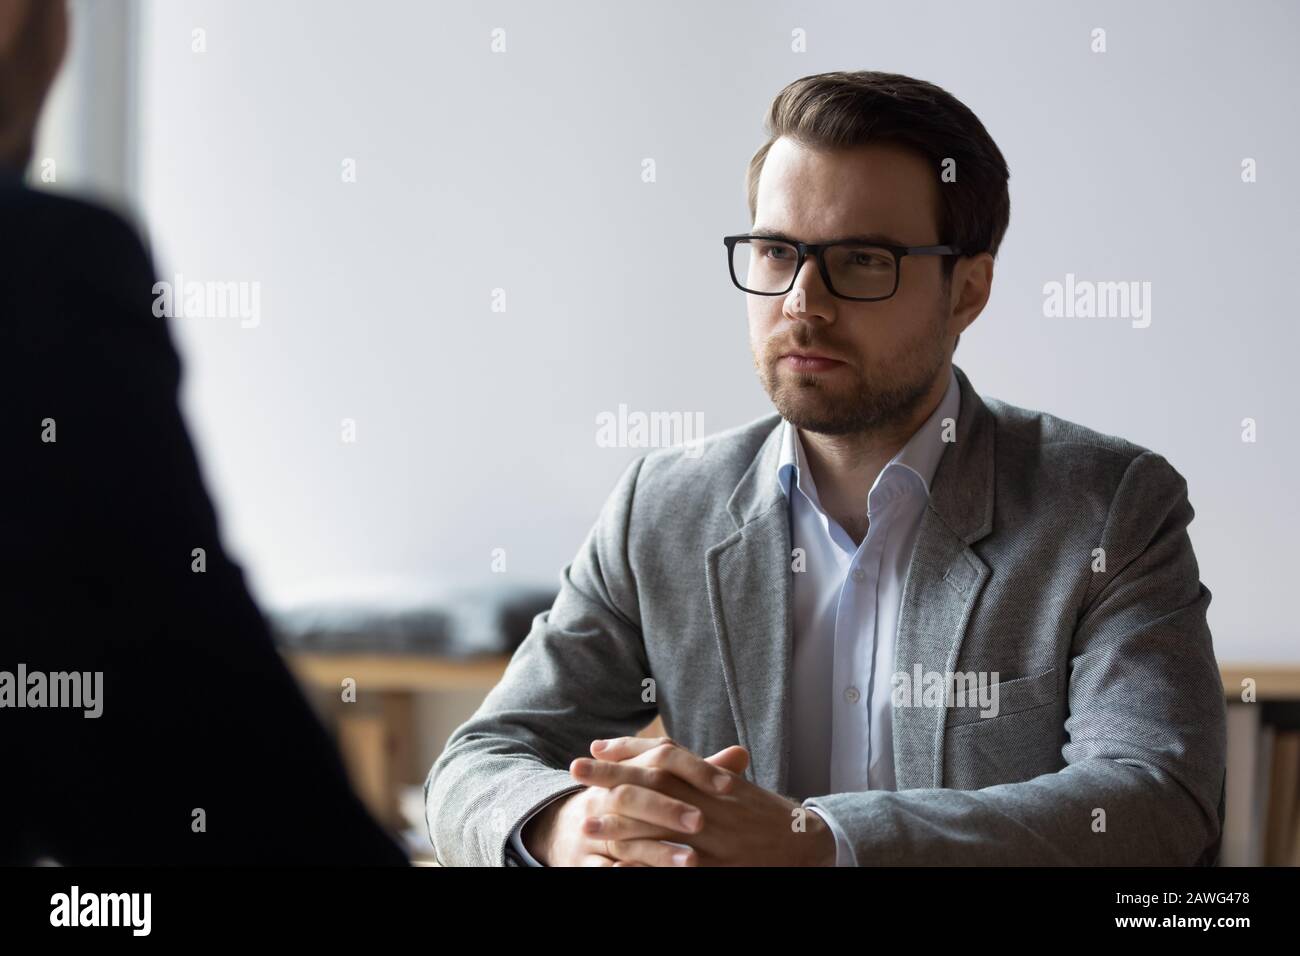 Serious businessman with clasped hands looking at opponent at negotiations Stock Photo